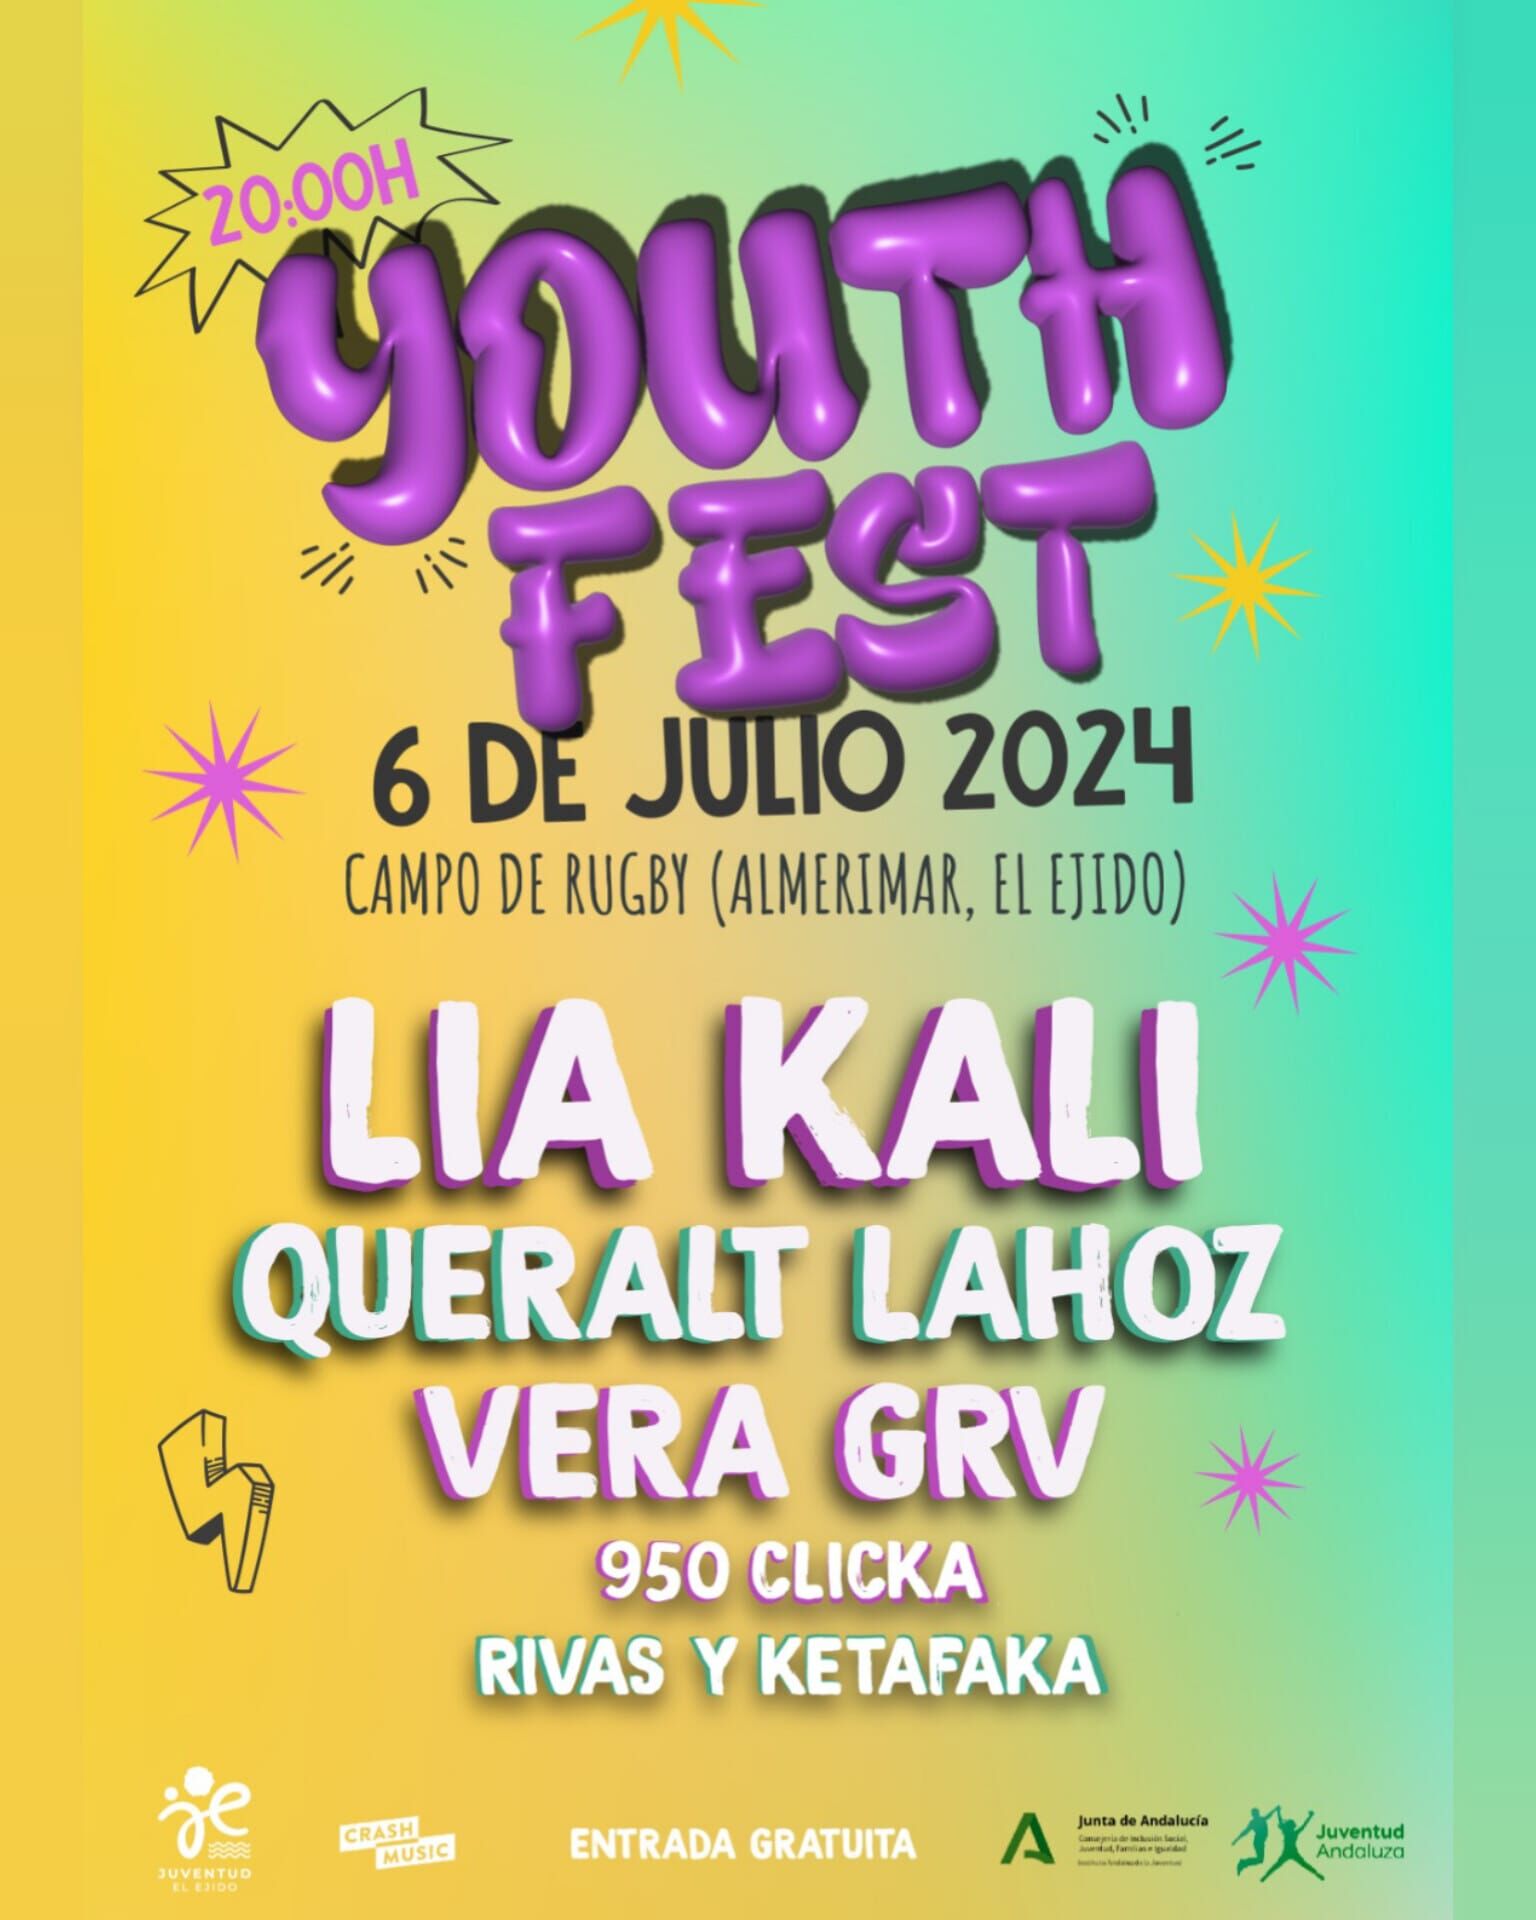 Youth Fest 2024